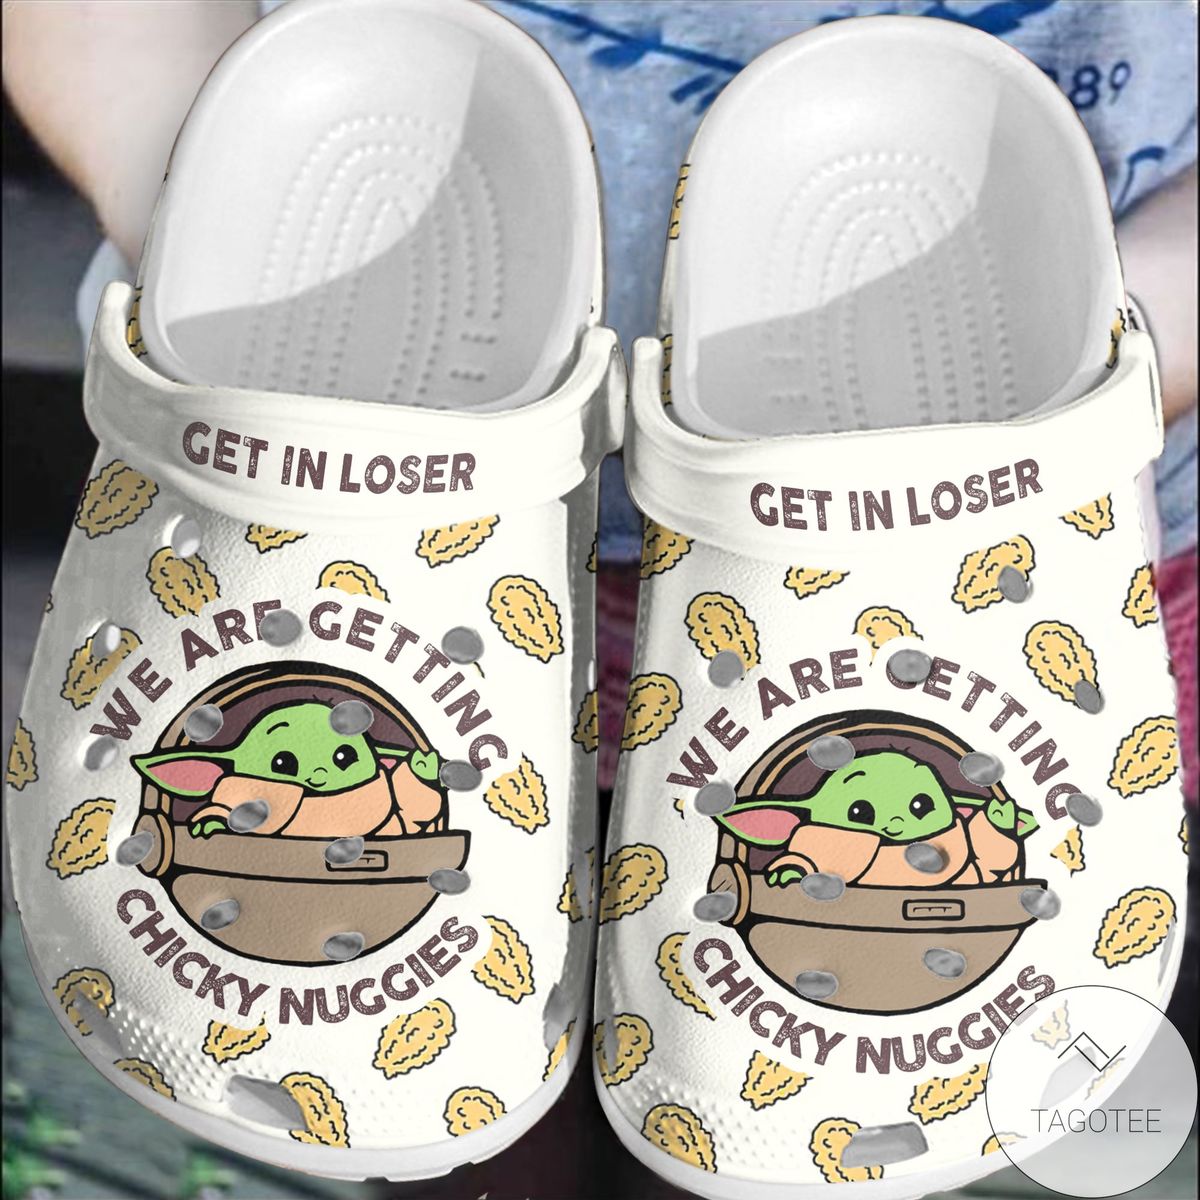 Baby Yoda We Are Getting Chicky Nugget Crocs